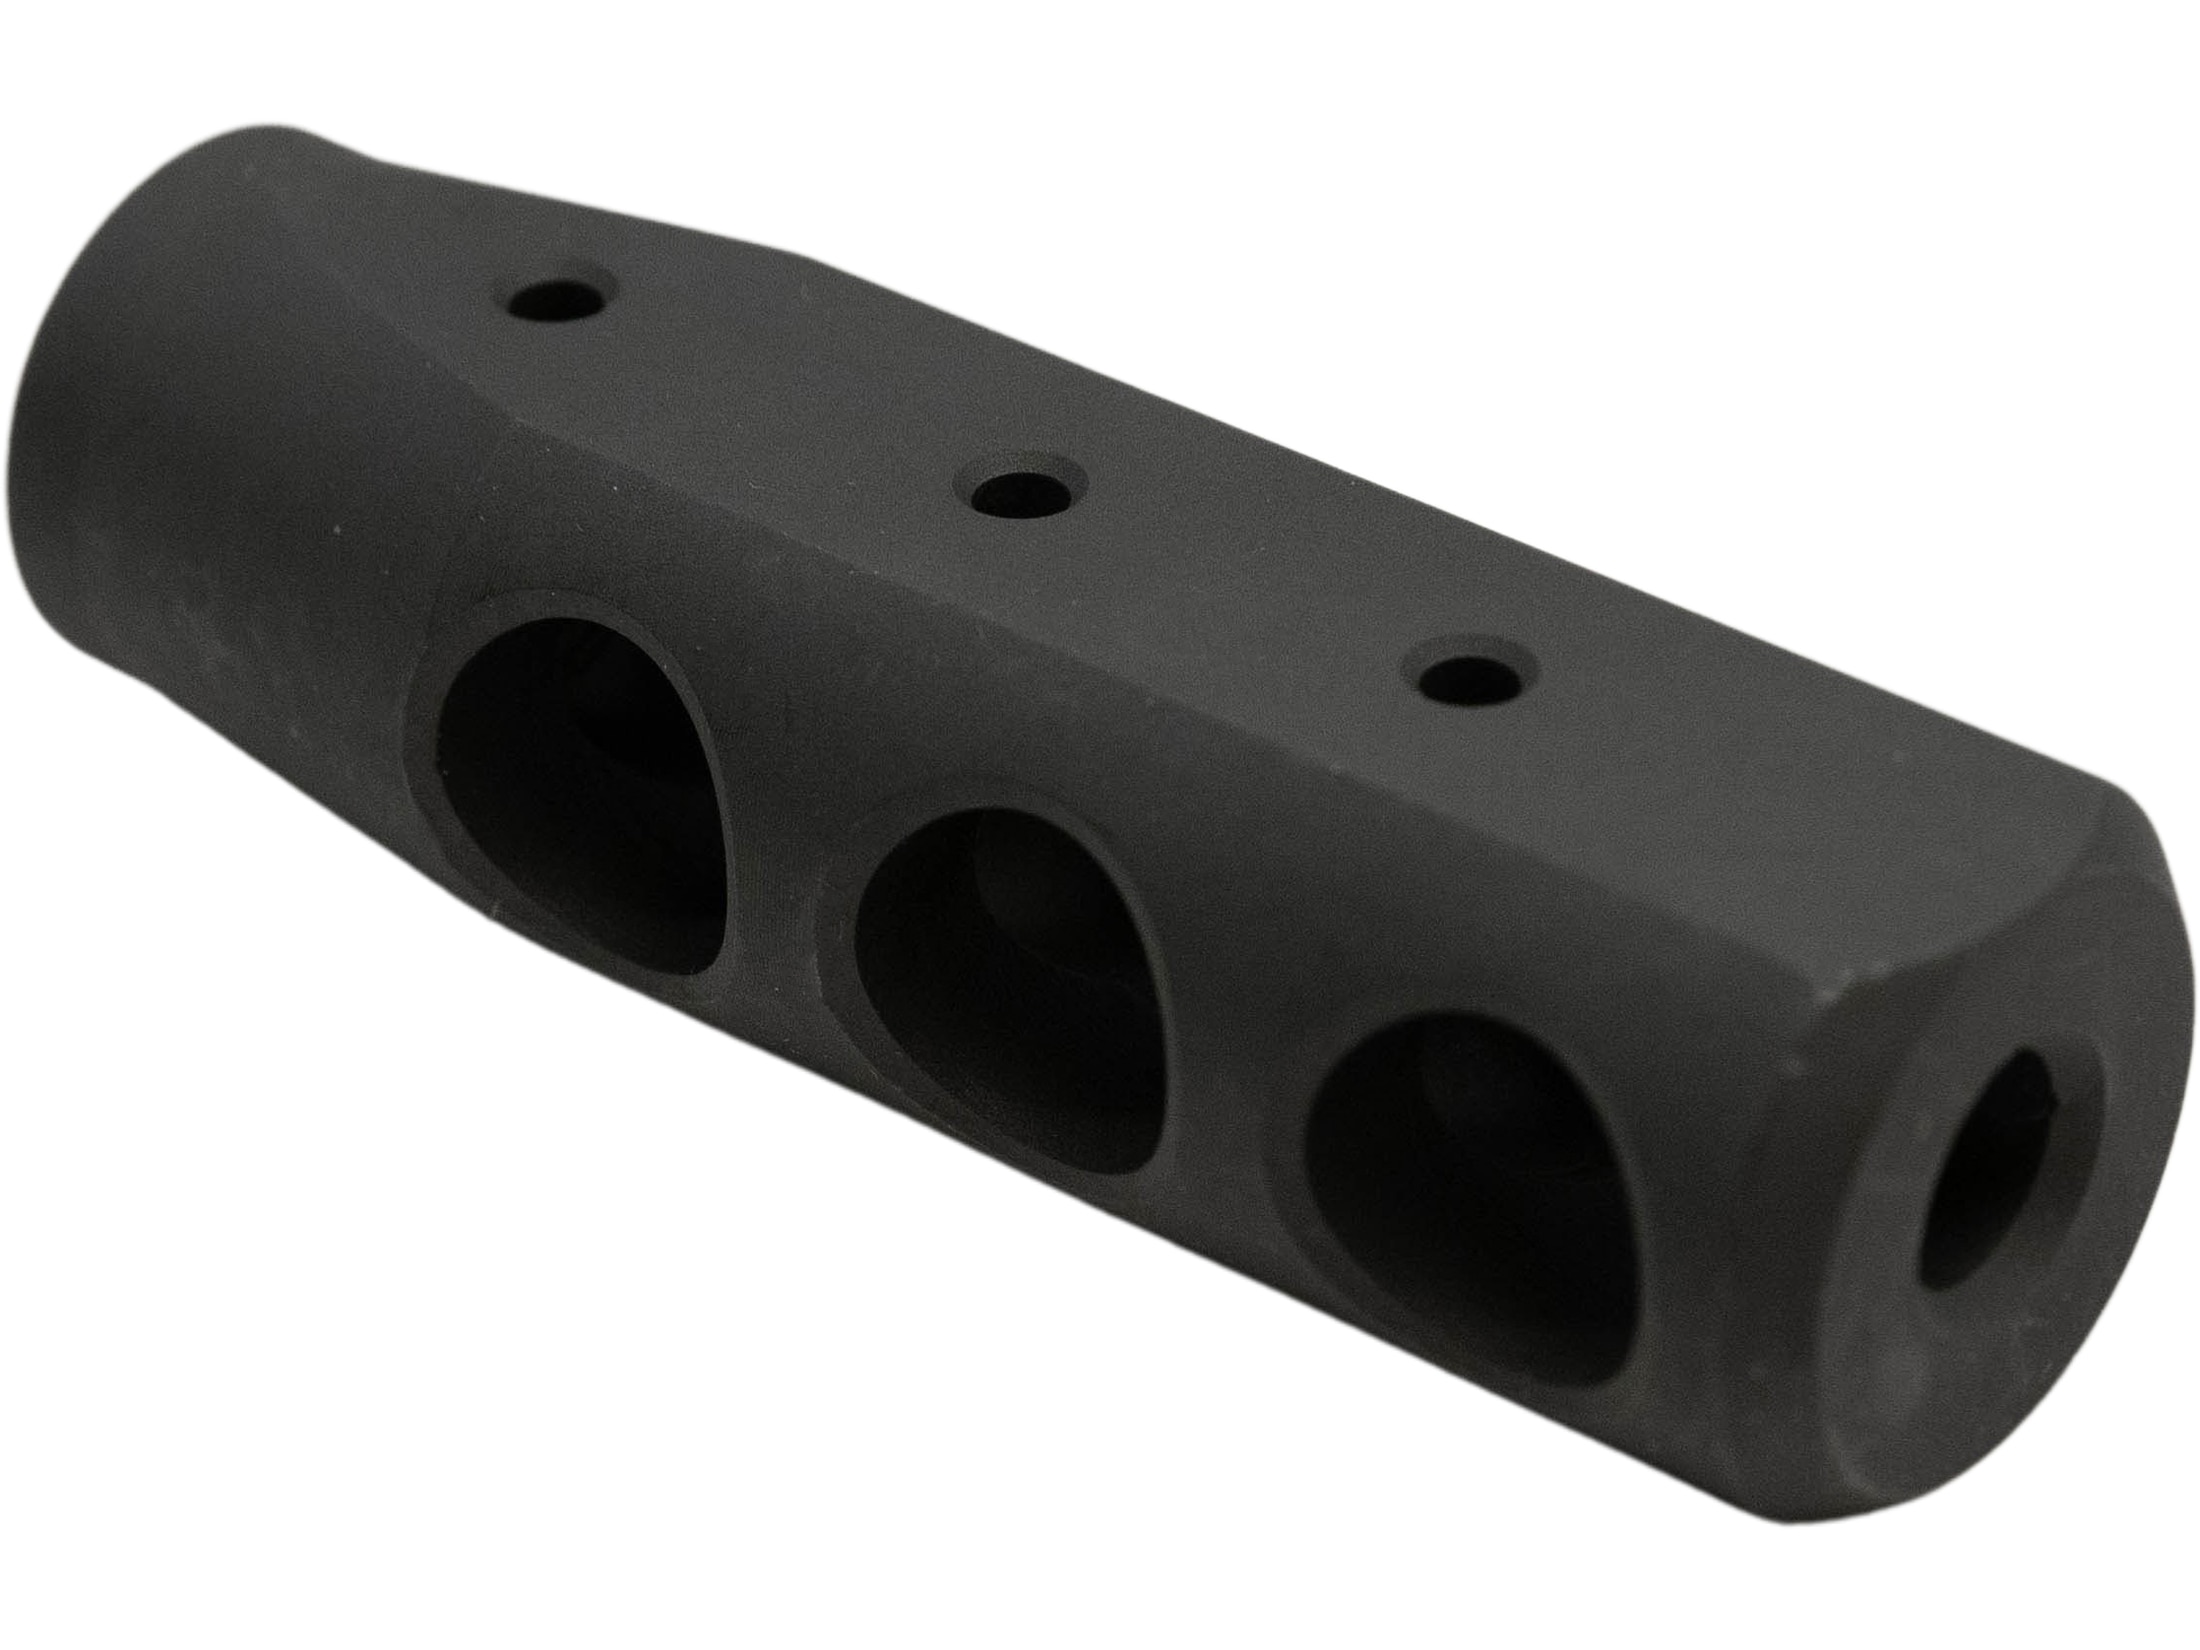 NEW Stainless Steel 1/2x28 Thread 223 5.56 Competition Muzzle Brake Free Washer 